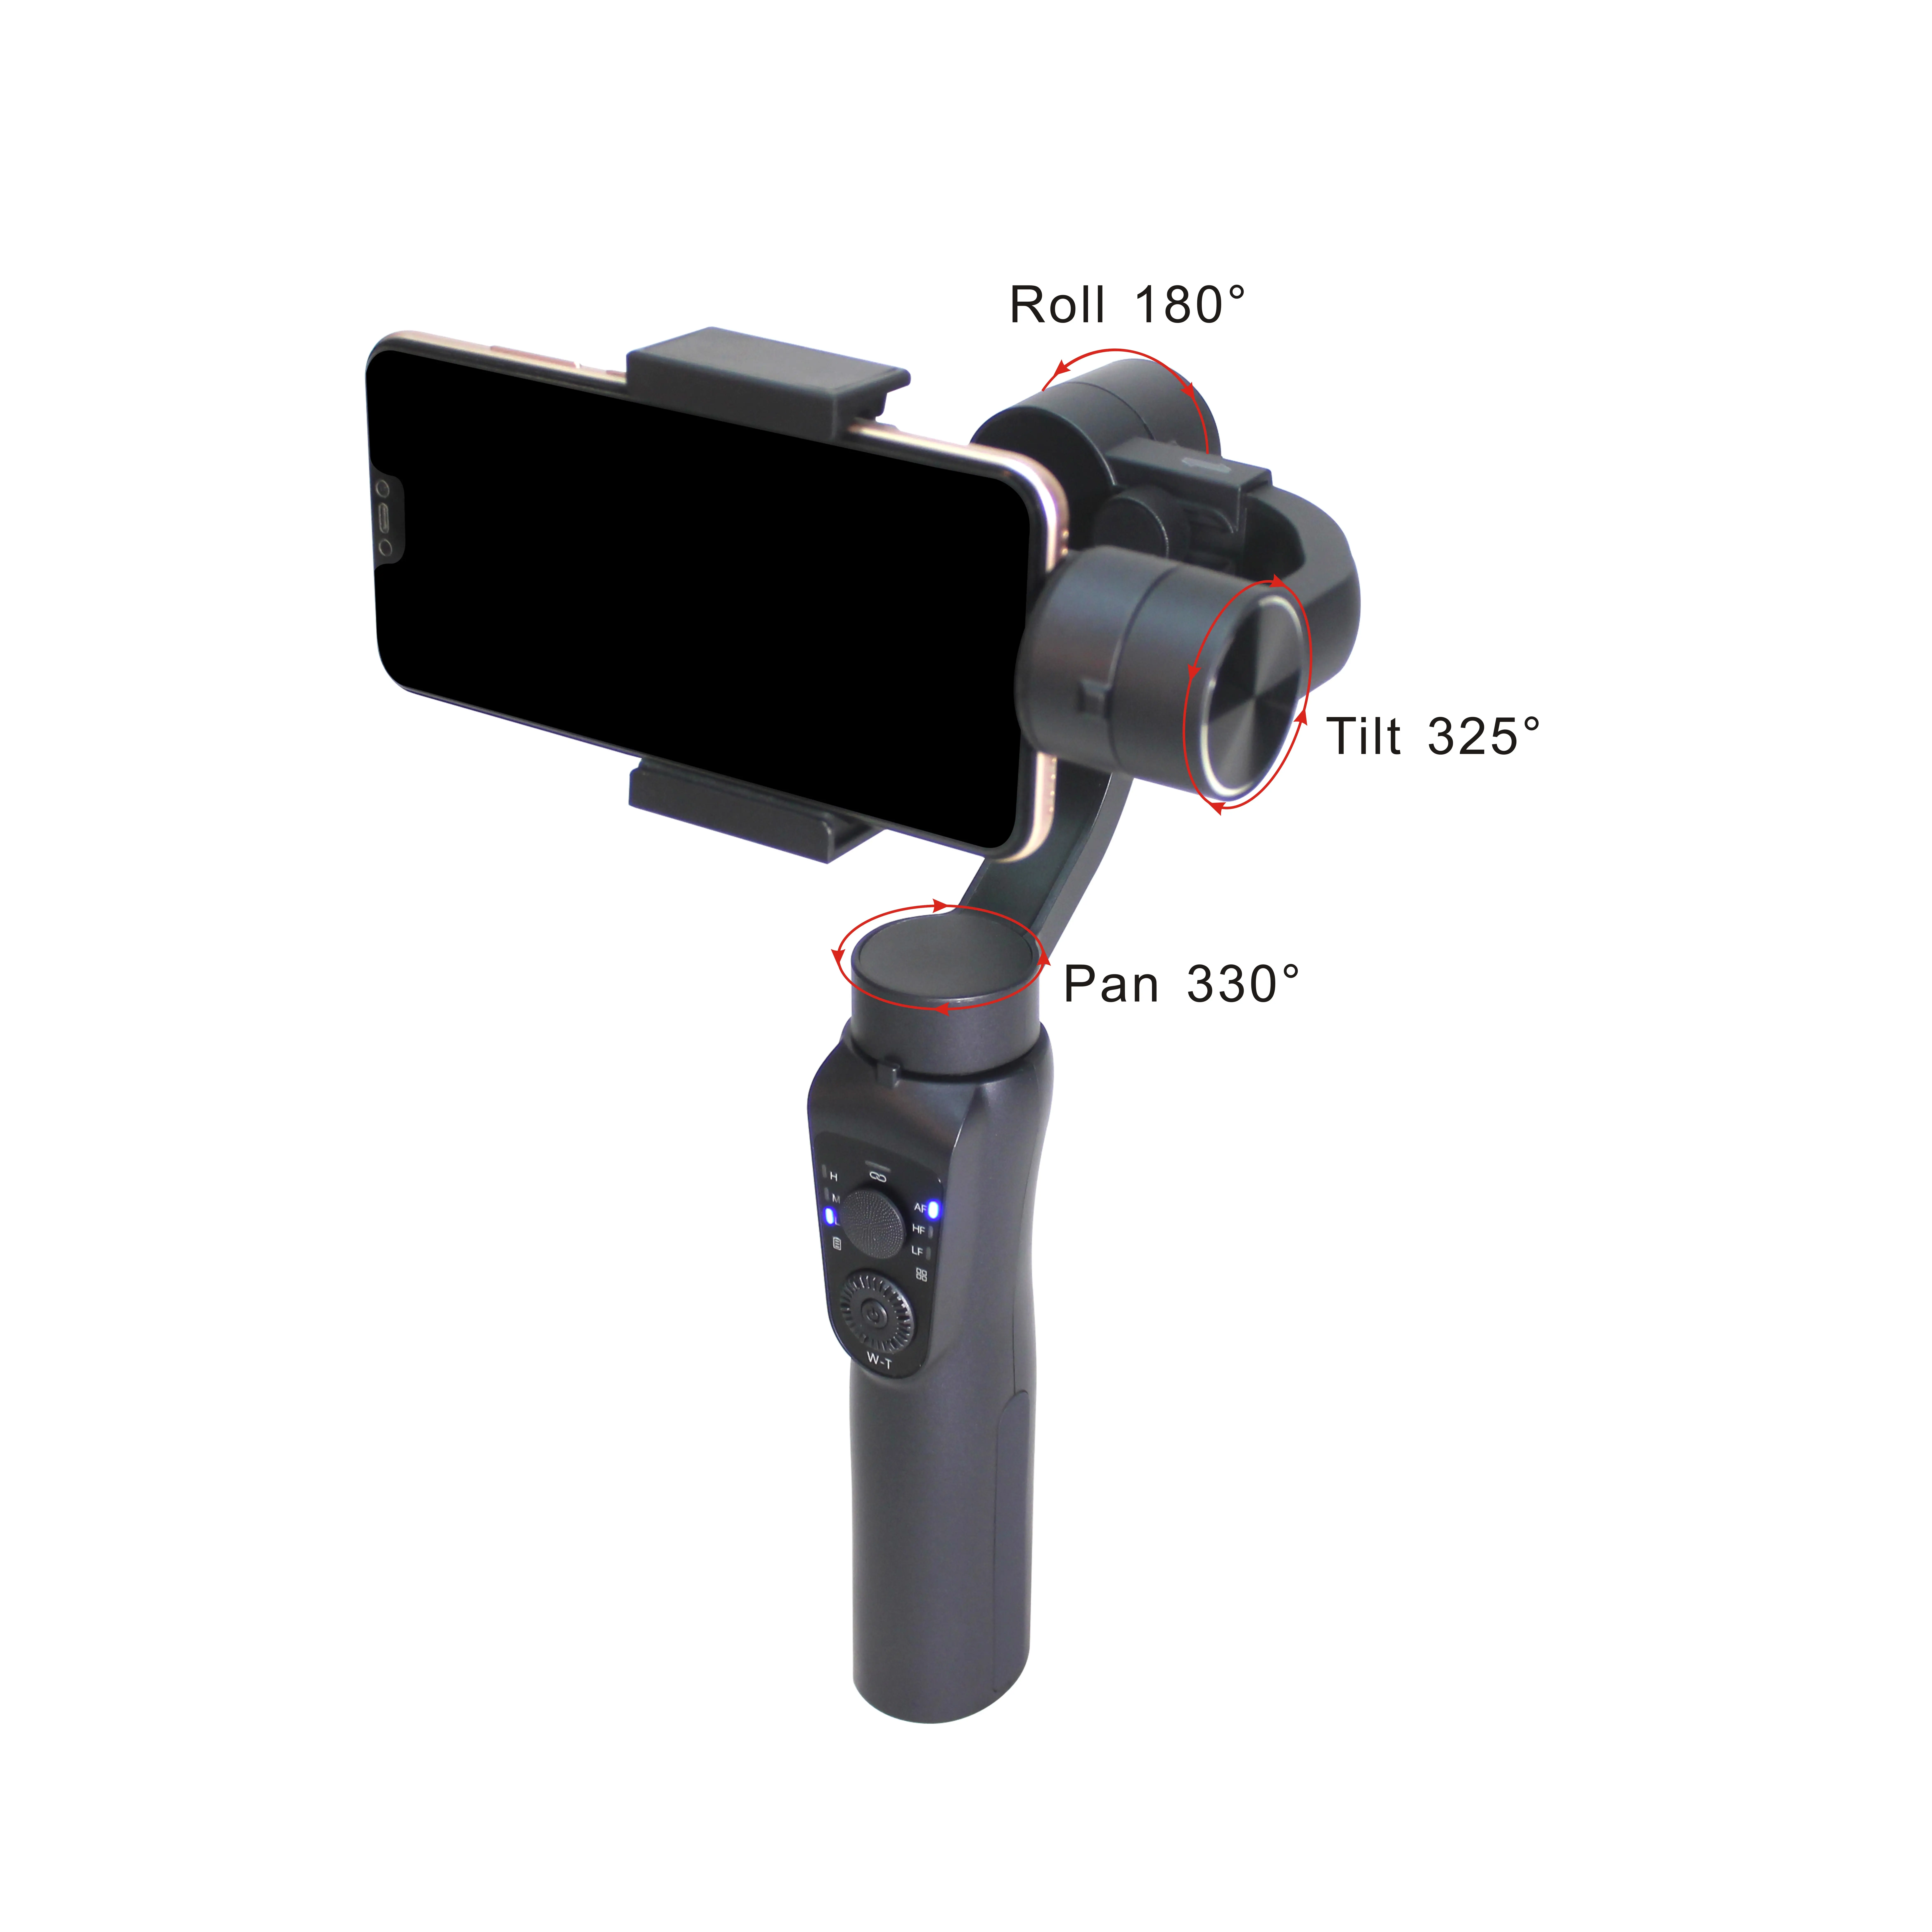 For Mobile Phone Stabilizer 3-axis handheld gimbal stabilizer gyro camera phone video stabilizer